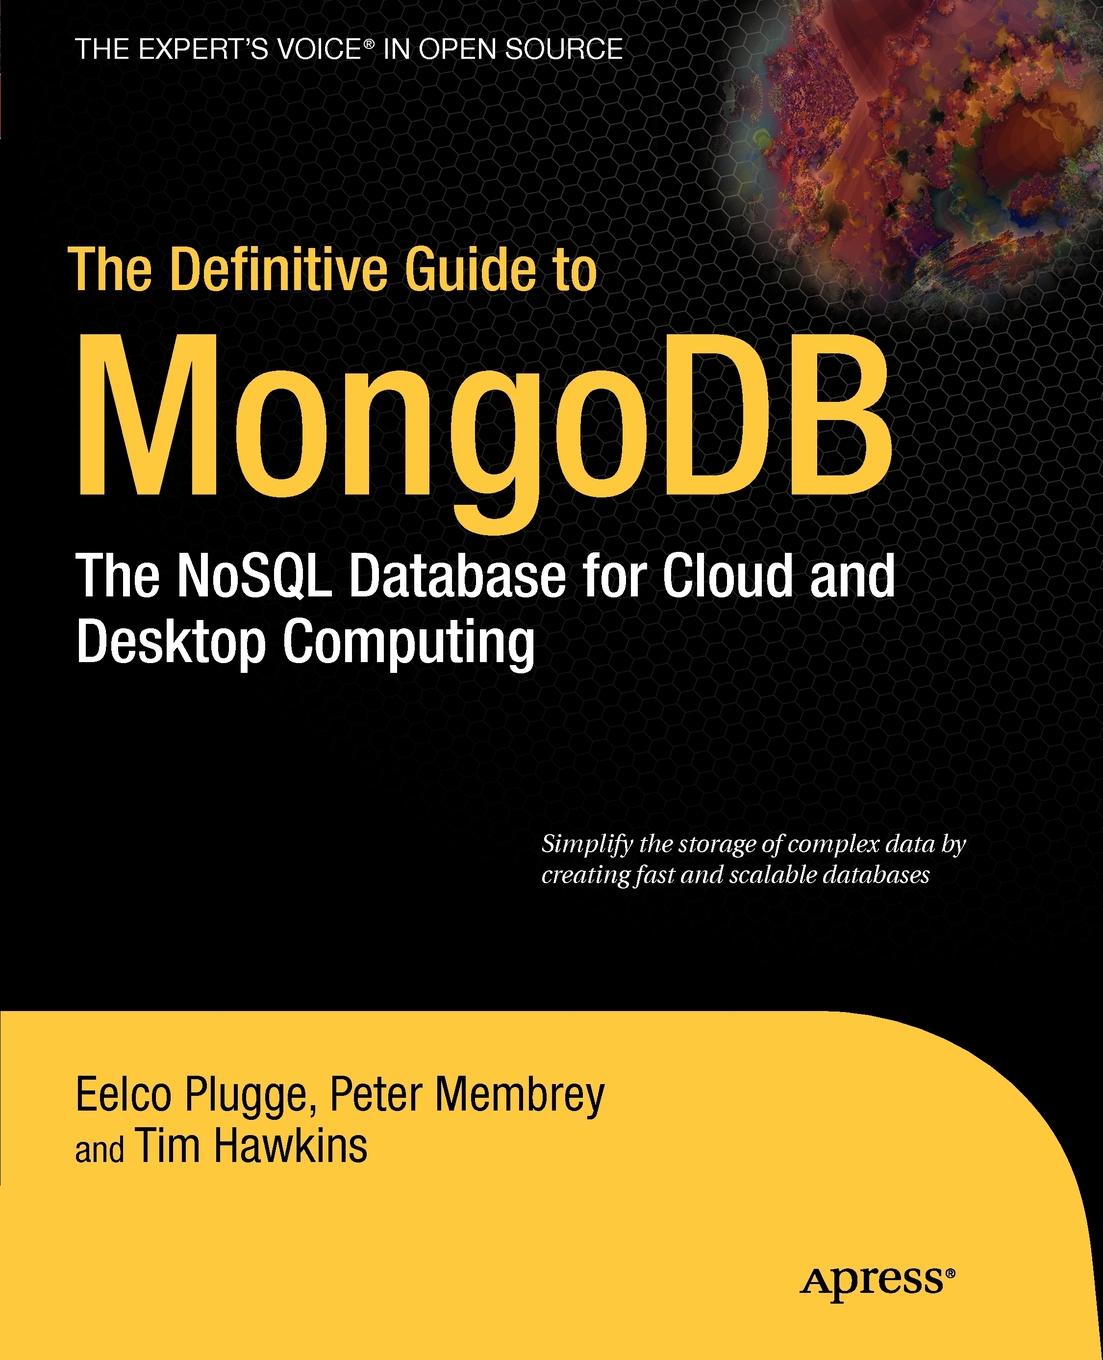 The Definitive Guide to Mongodb. The Nosql Database for Cloud and Desktop Computing